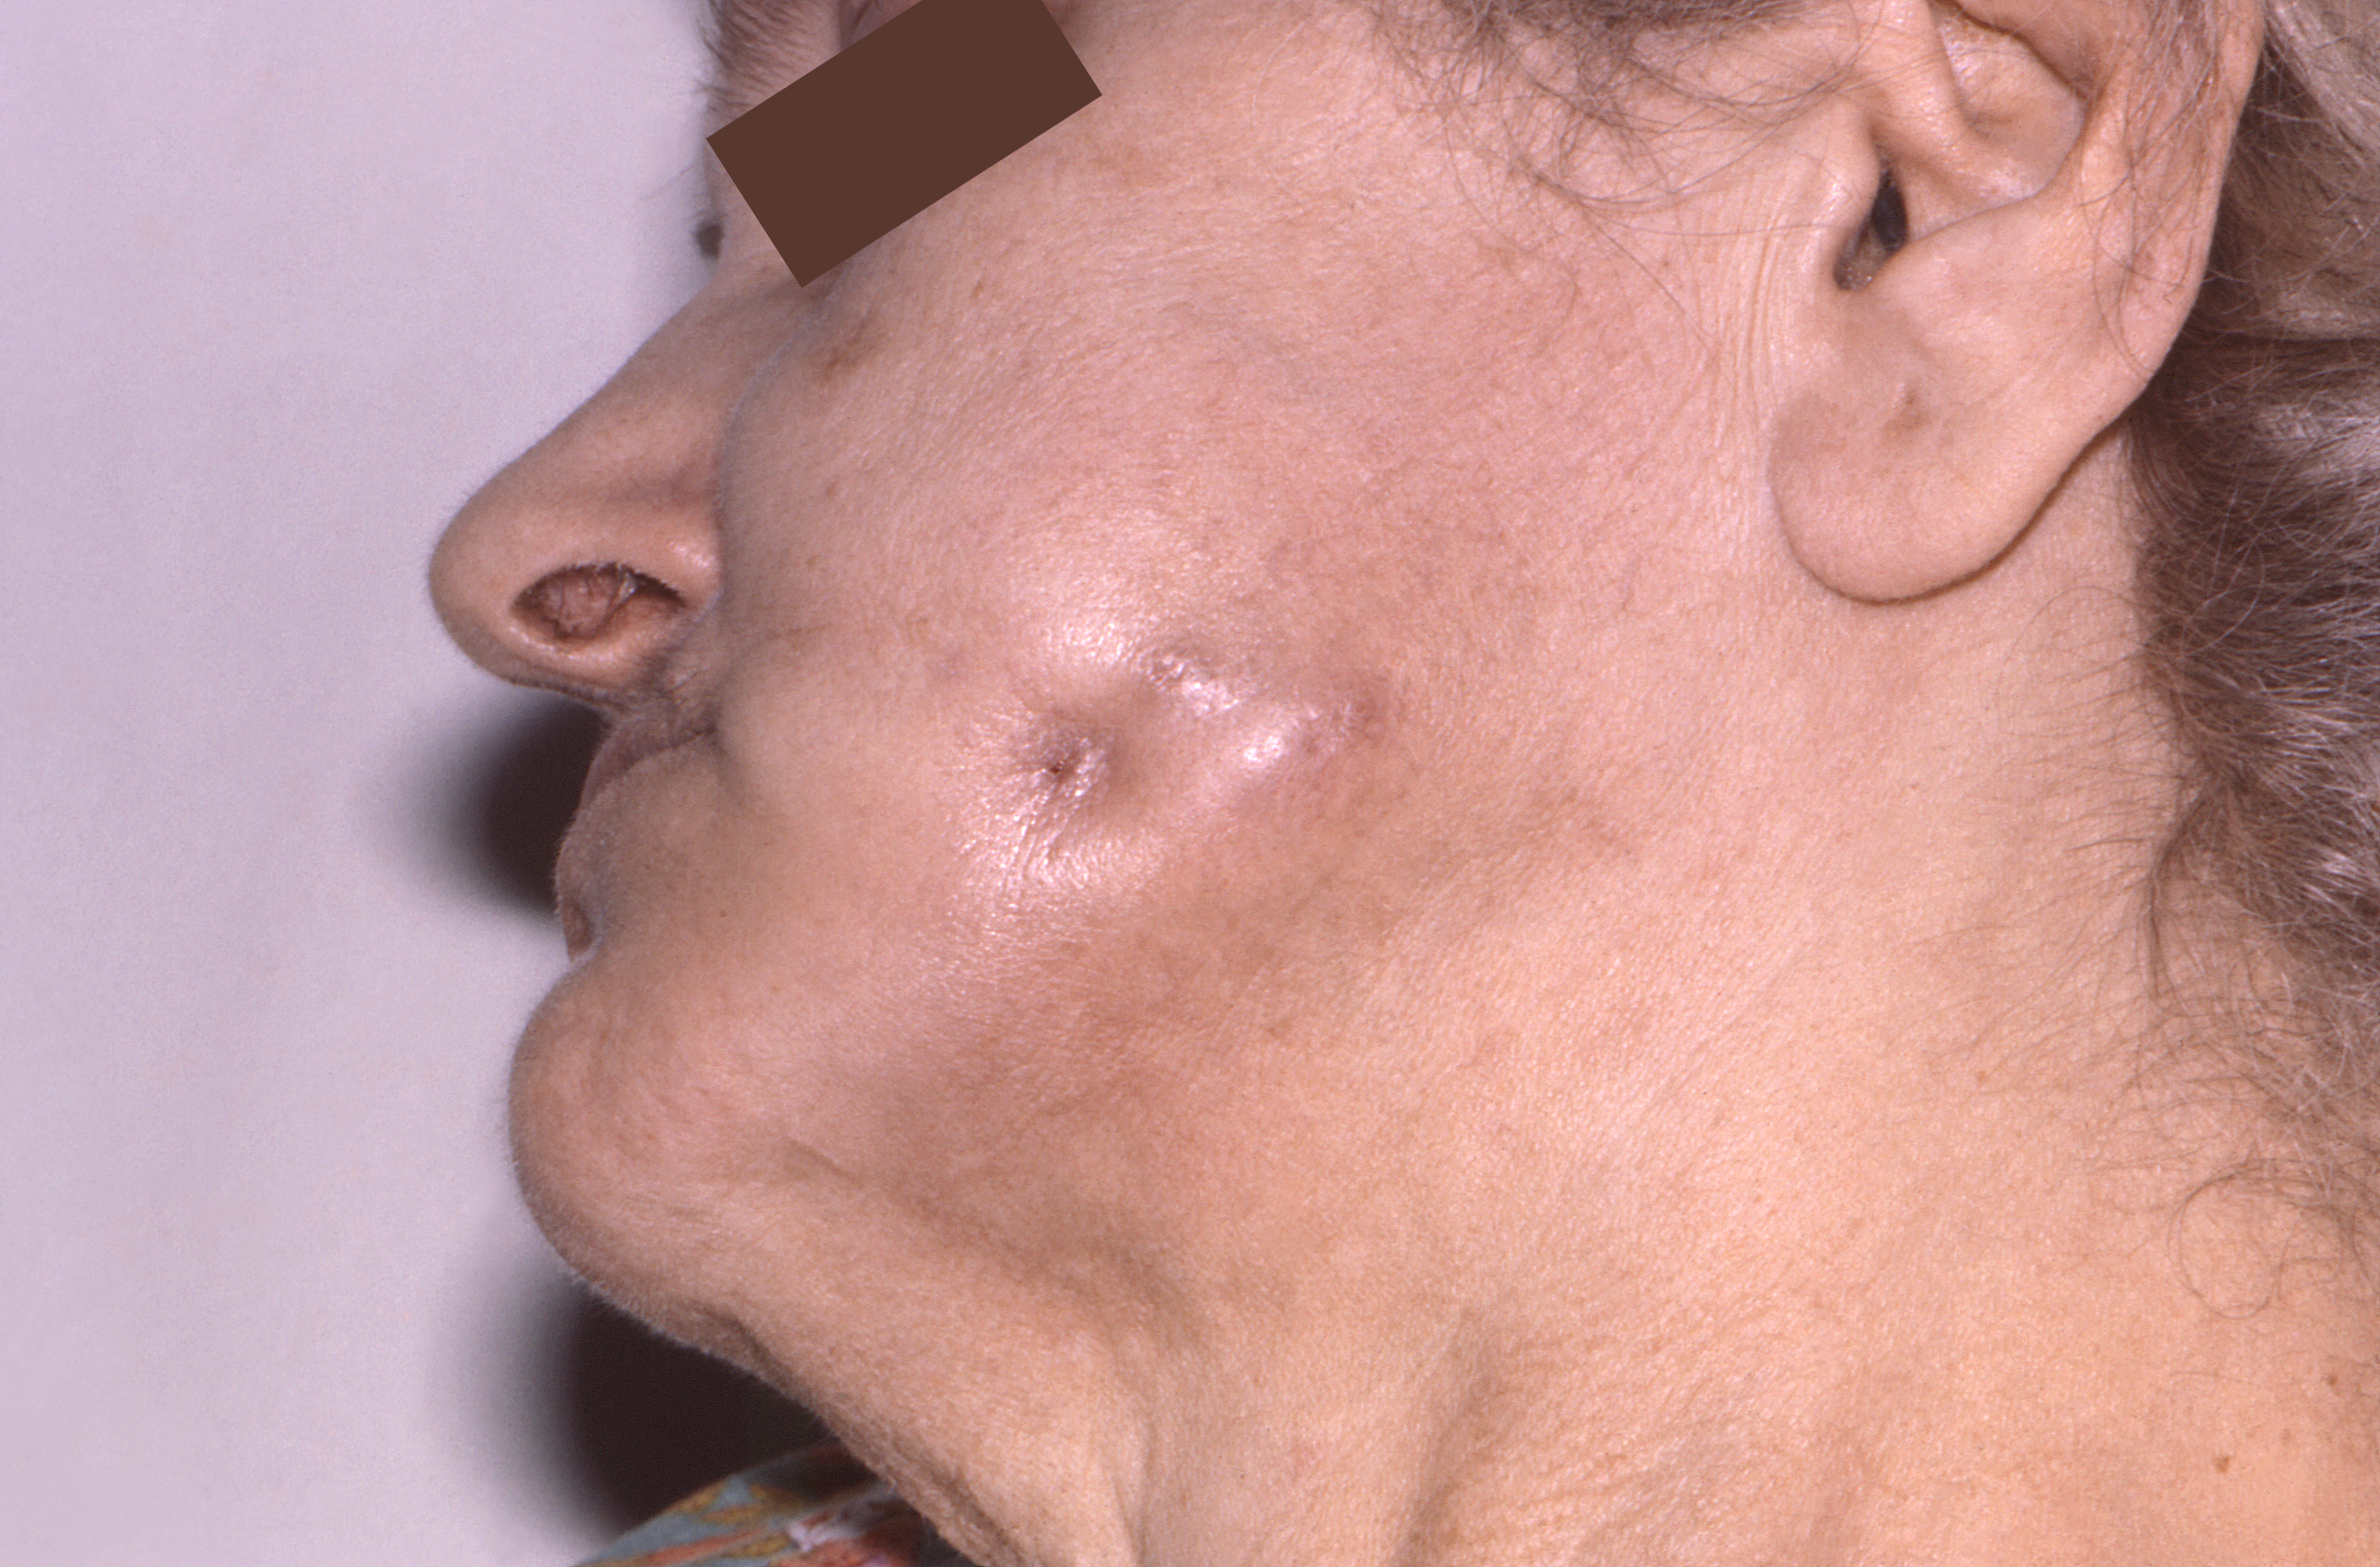 Seen from the left lateral perspective, this female patient displayed a fistula that had formed on the region of her left cheek, which had been brought on by an infection known as actinomycosis, or mycetoma, caused by the Gram-positive, fungus-like aerobic bacteria of the order Actinomycetales. Mycetoma is a slowly progressive, destructive infection of the cutaneous and subcutaneous tissues, fascia, and can progress to a point where it can affect bone as well.